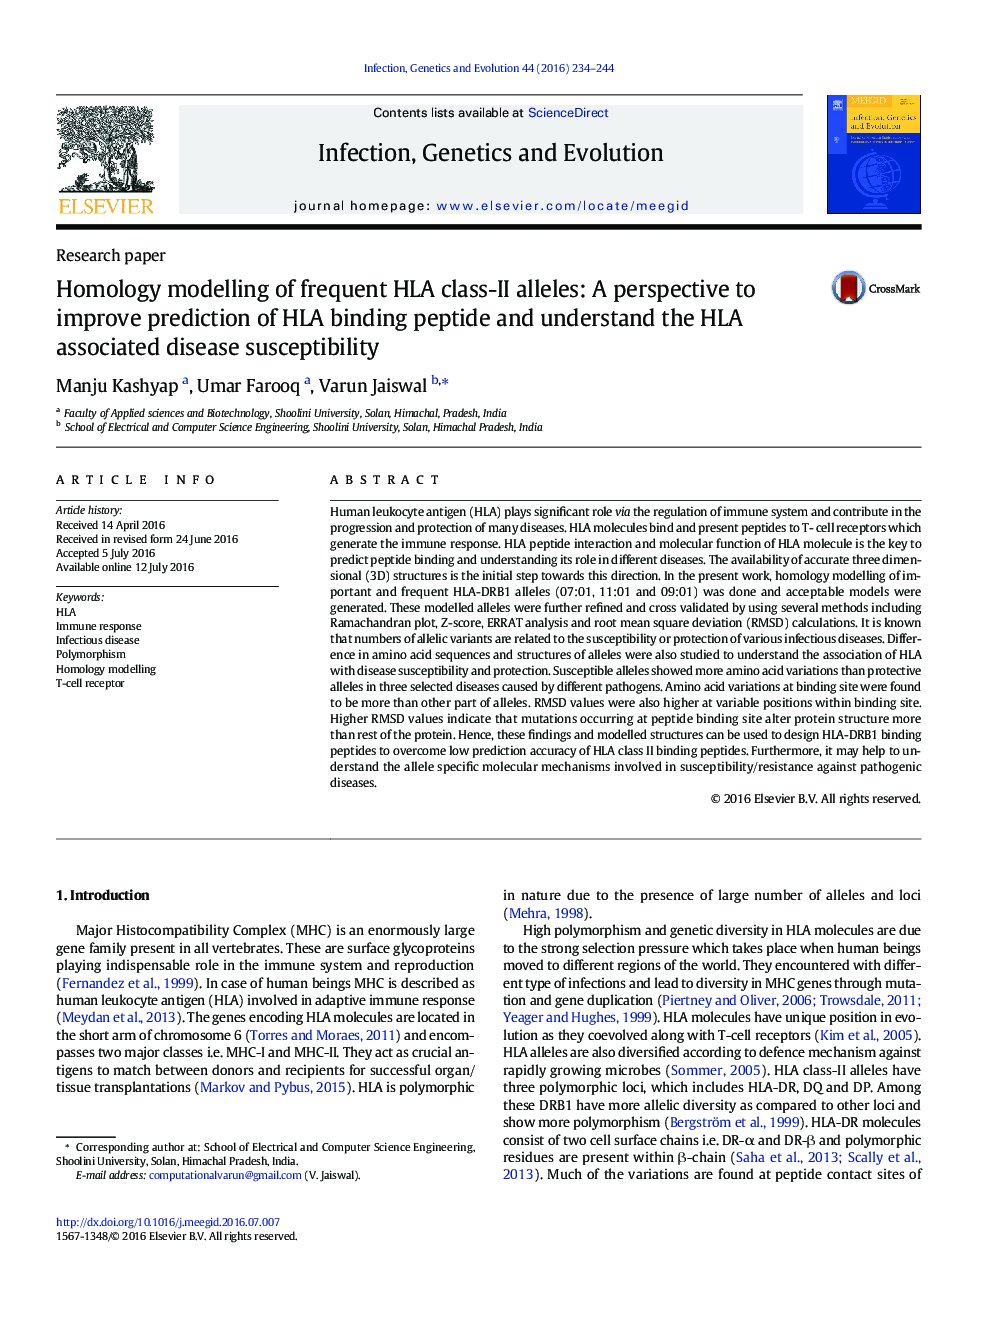 Homology modelling of frequent HLA class-II alleles: A perspective to improve prediction of HLA binding peptide and understand the HLA associated disease susceptibility